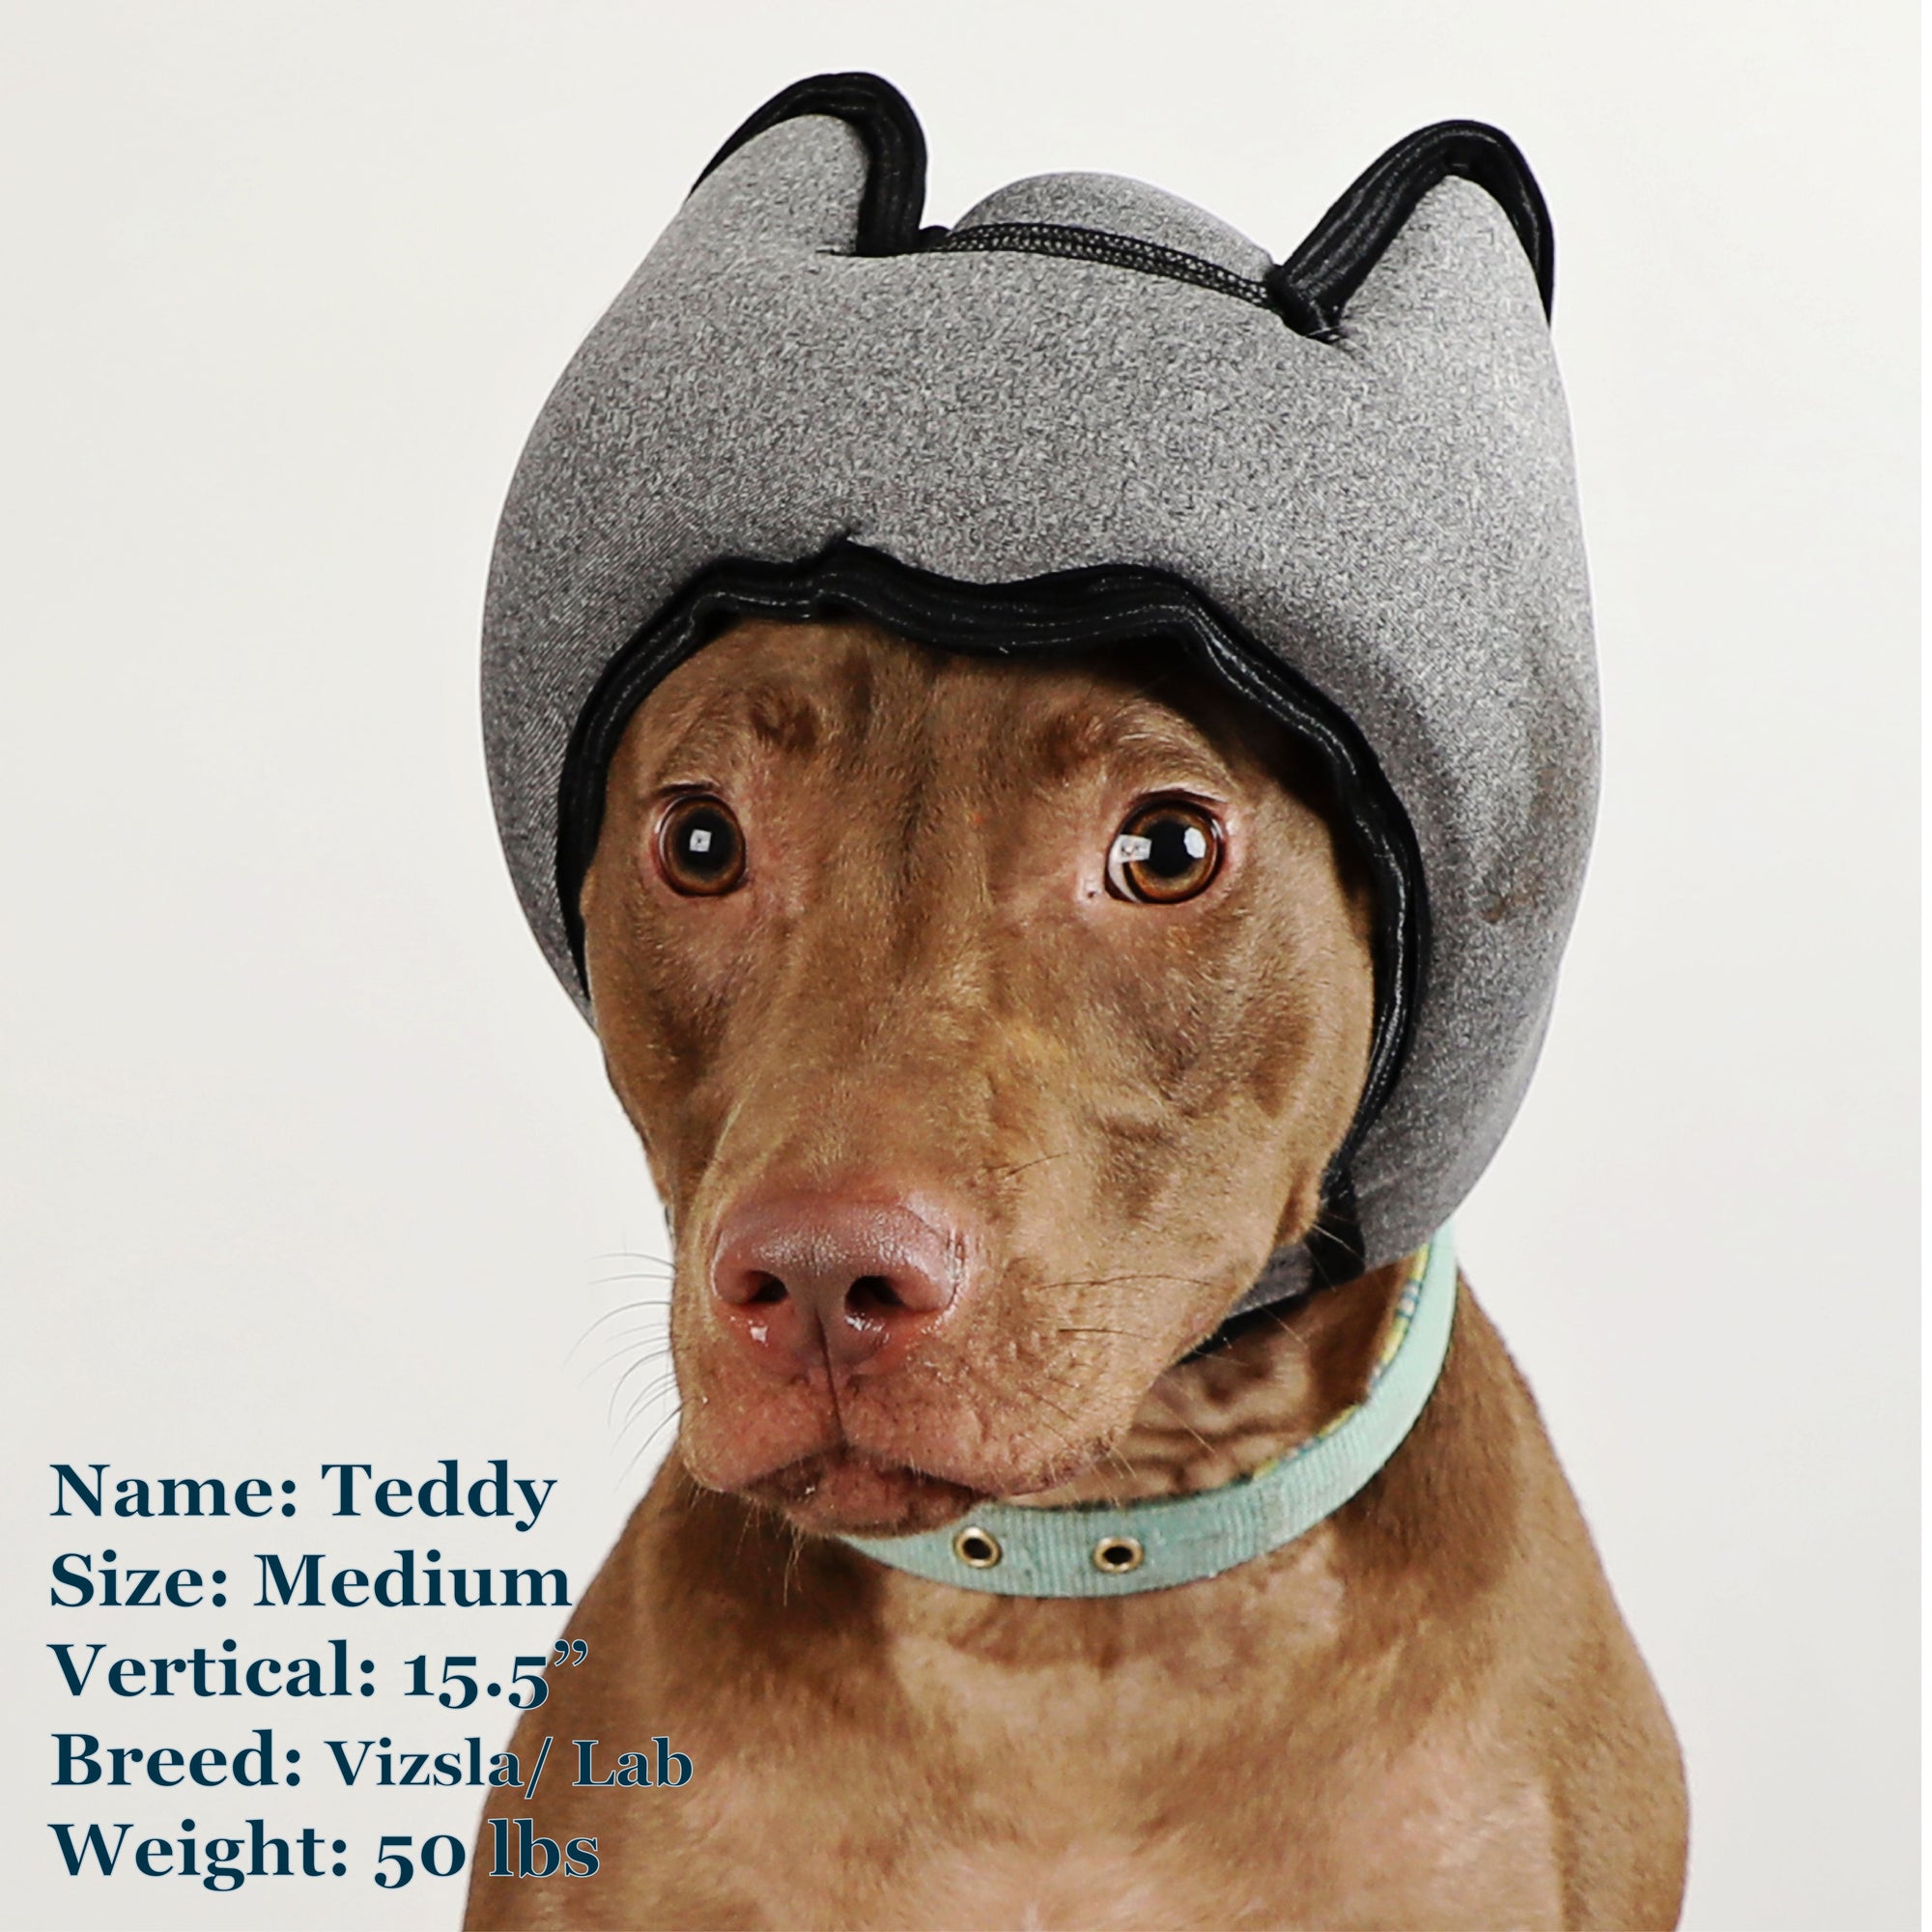 Teddy is a Vizsla Lab Mix in a Medium Grey PAWNIX Noise Cancelling Headset for dogs